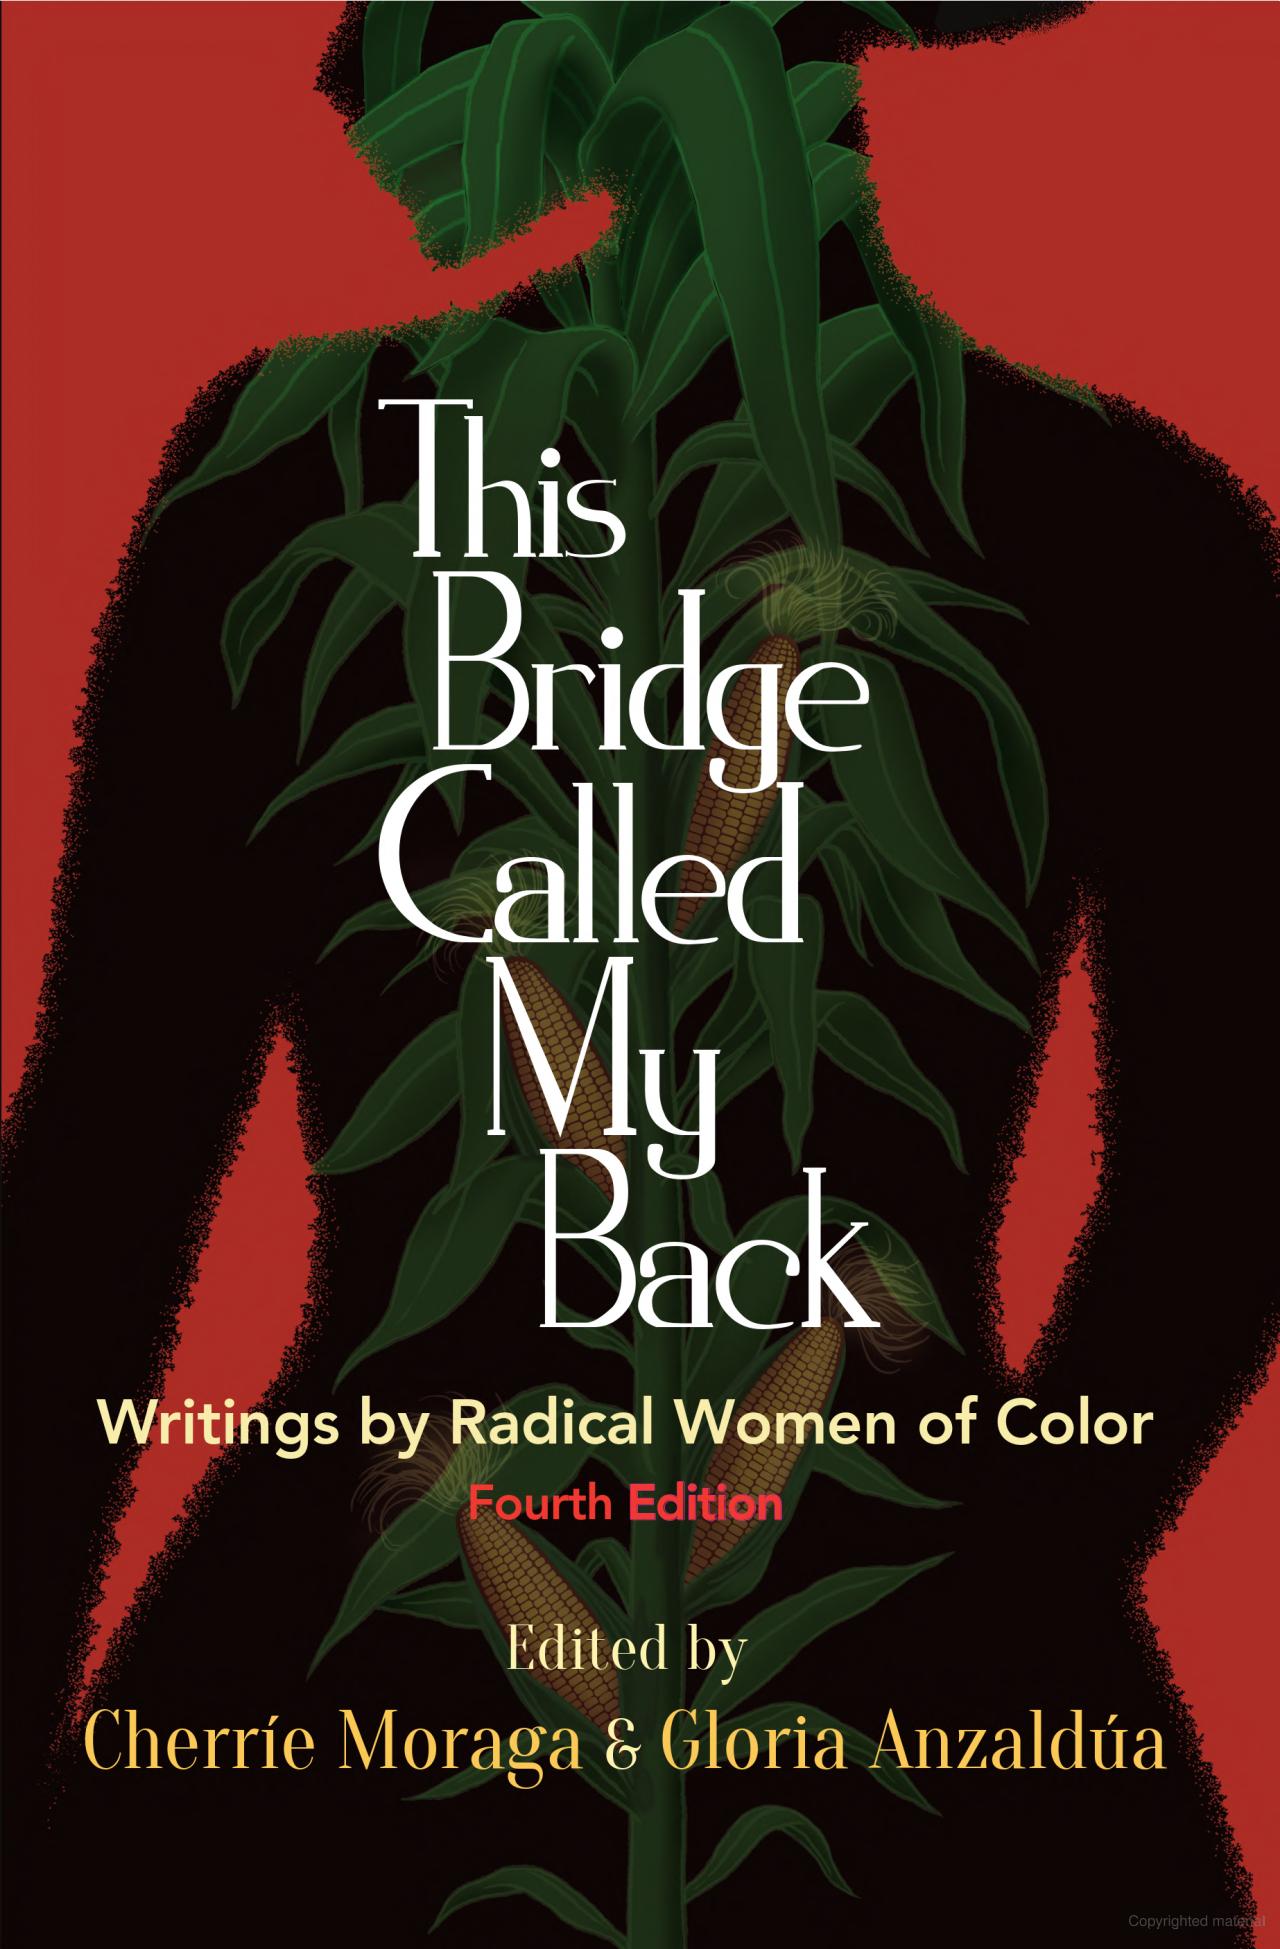 This Bridge Called my Back: Writings by Radical Women of Color